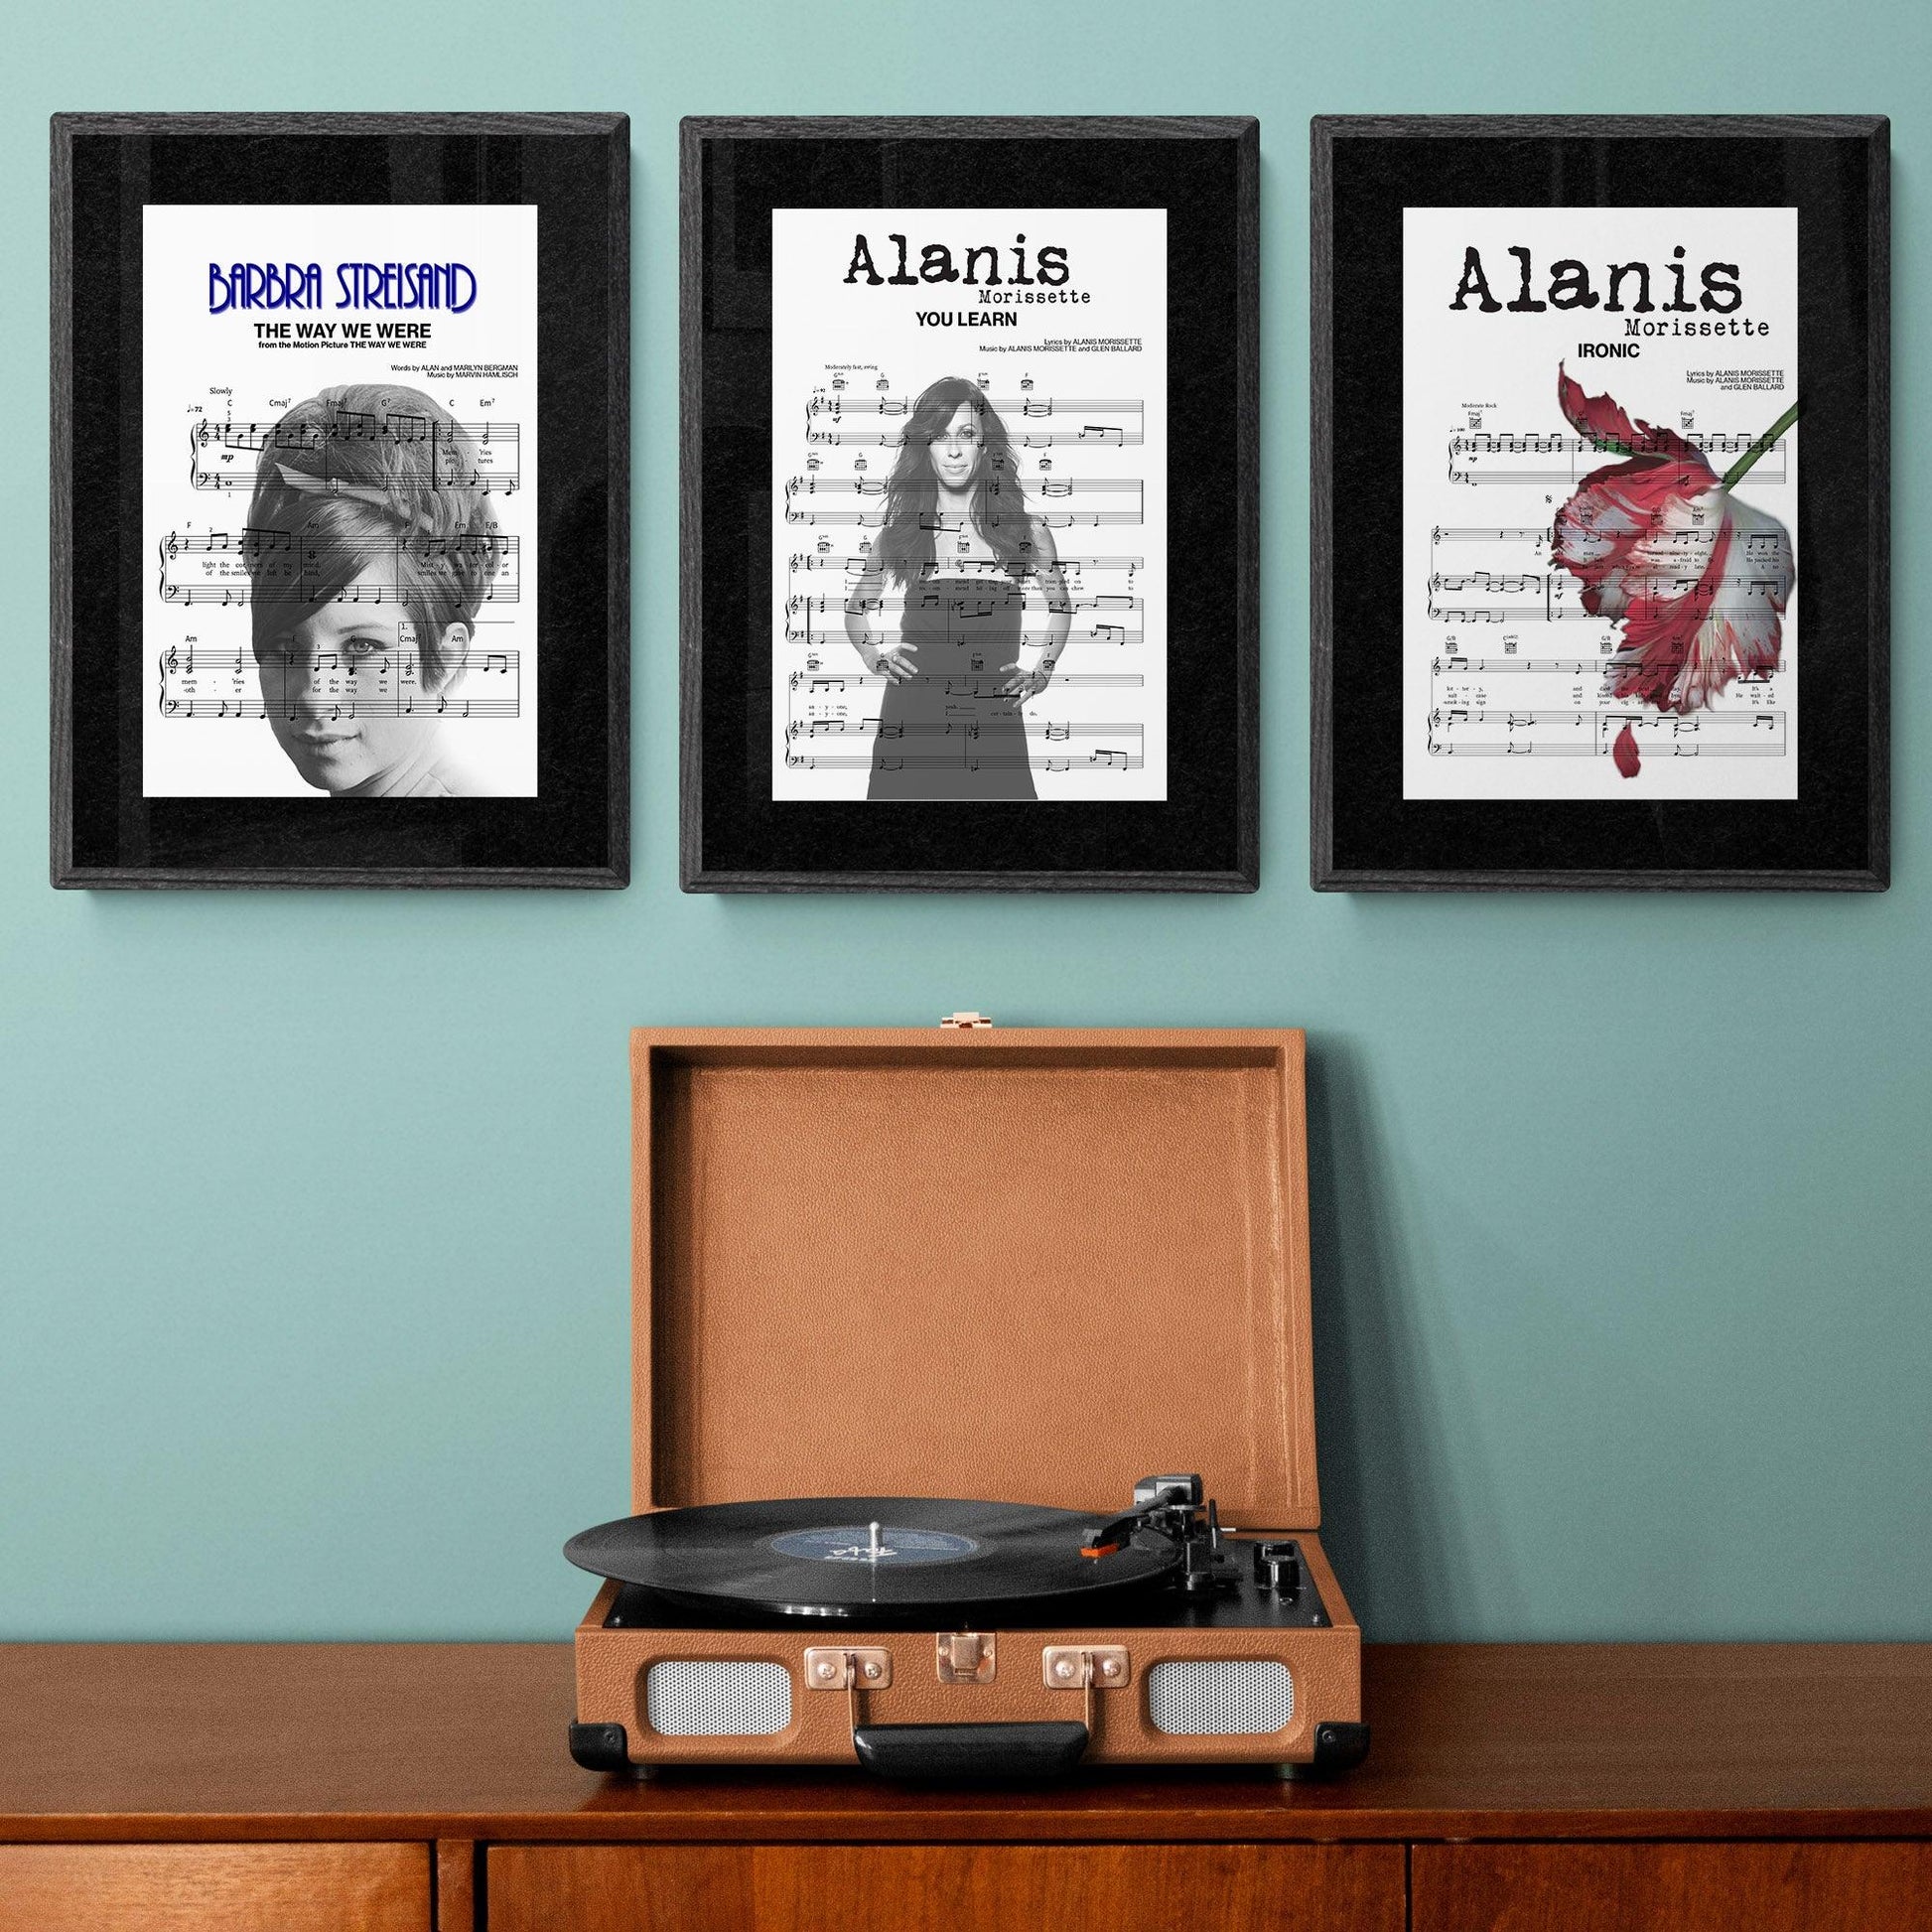 Barbra Streisand - The Way We Were Song Print | Song Music Sheet Notes Print Everyone has a favorite song especially Barbra Streisand Print and now you can show the score as printed staff. The personal favorite song sheet print shows the song chosen as the score. 